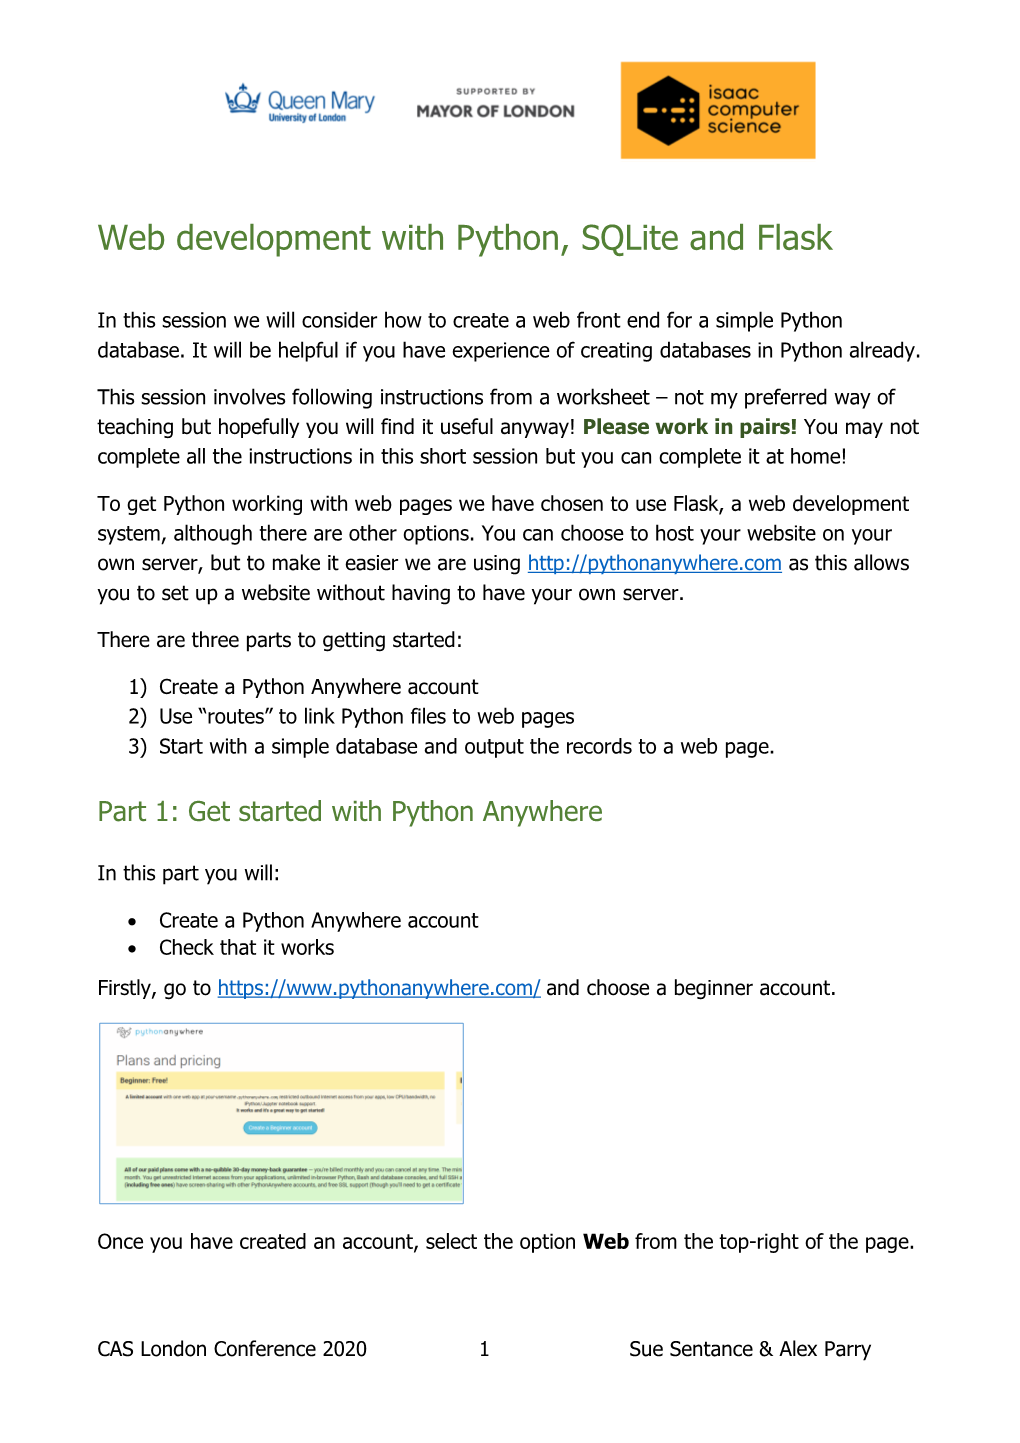 Web Development with Python, Sqlite and Flask